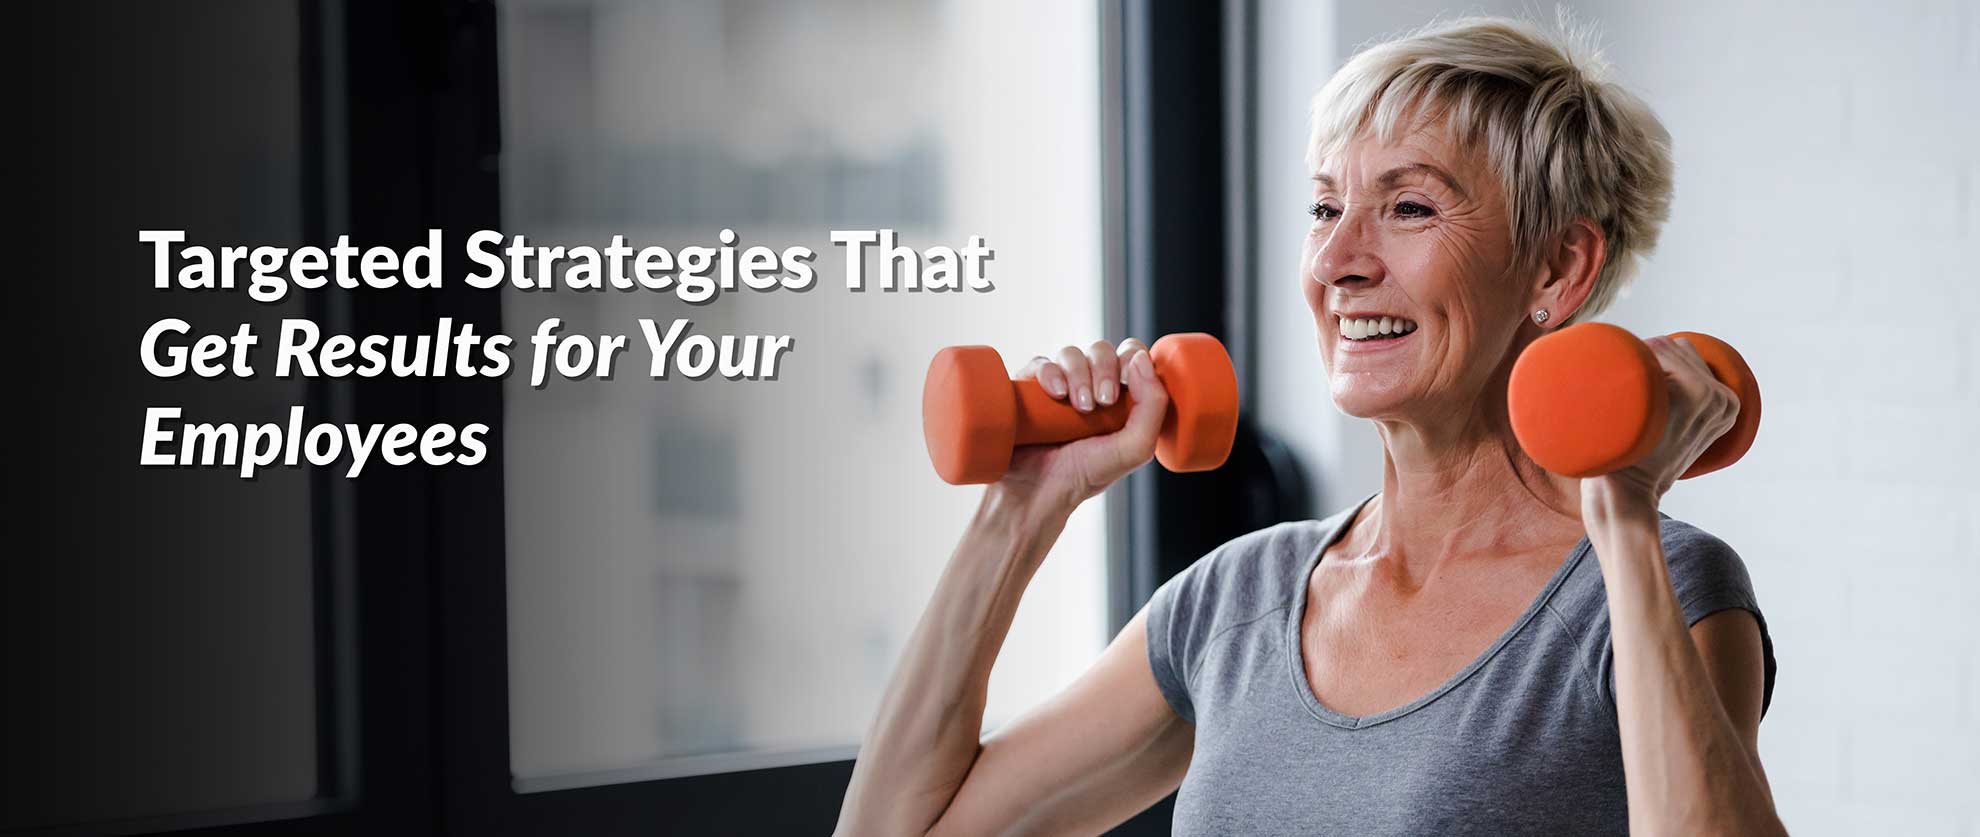 Targeted strategies that get results for your employees